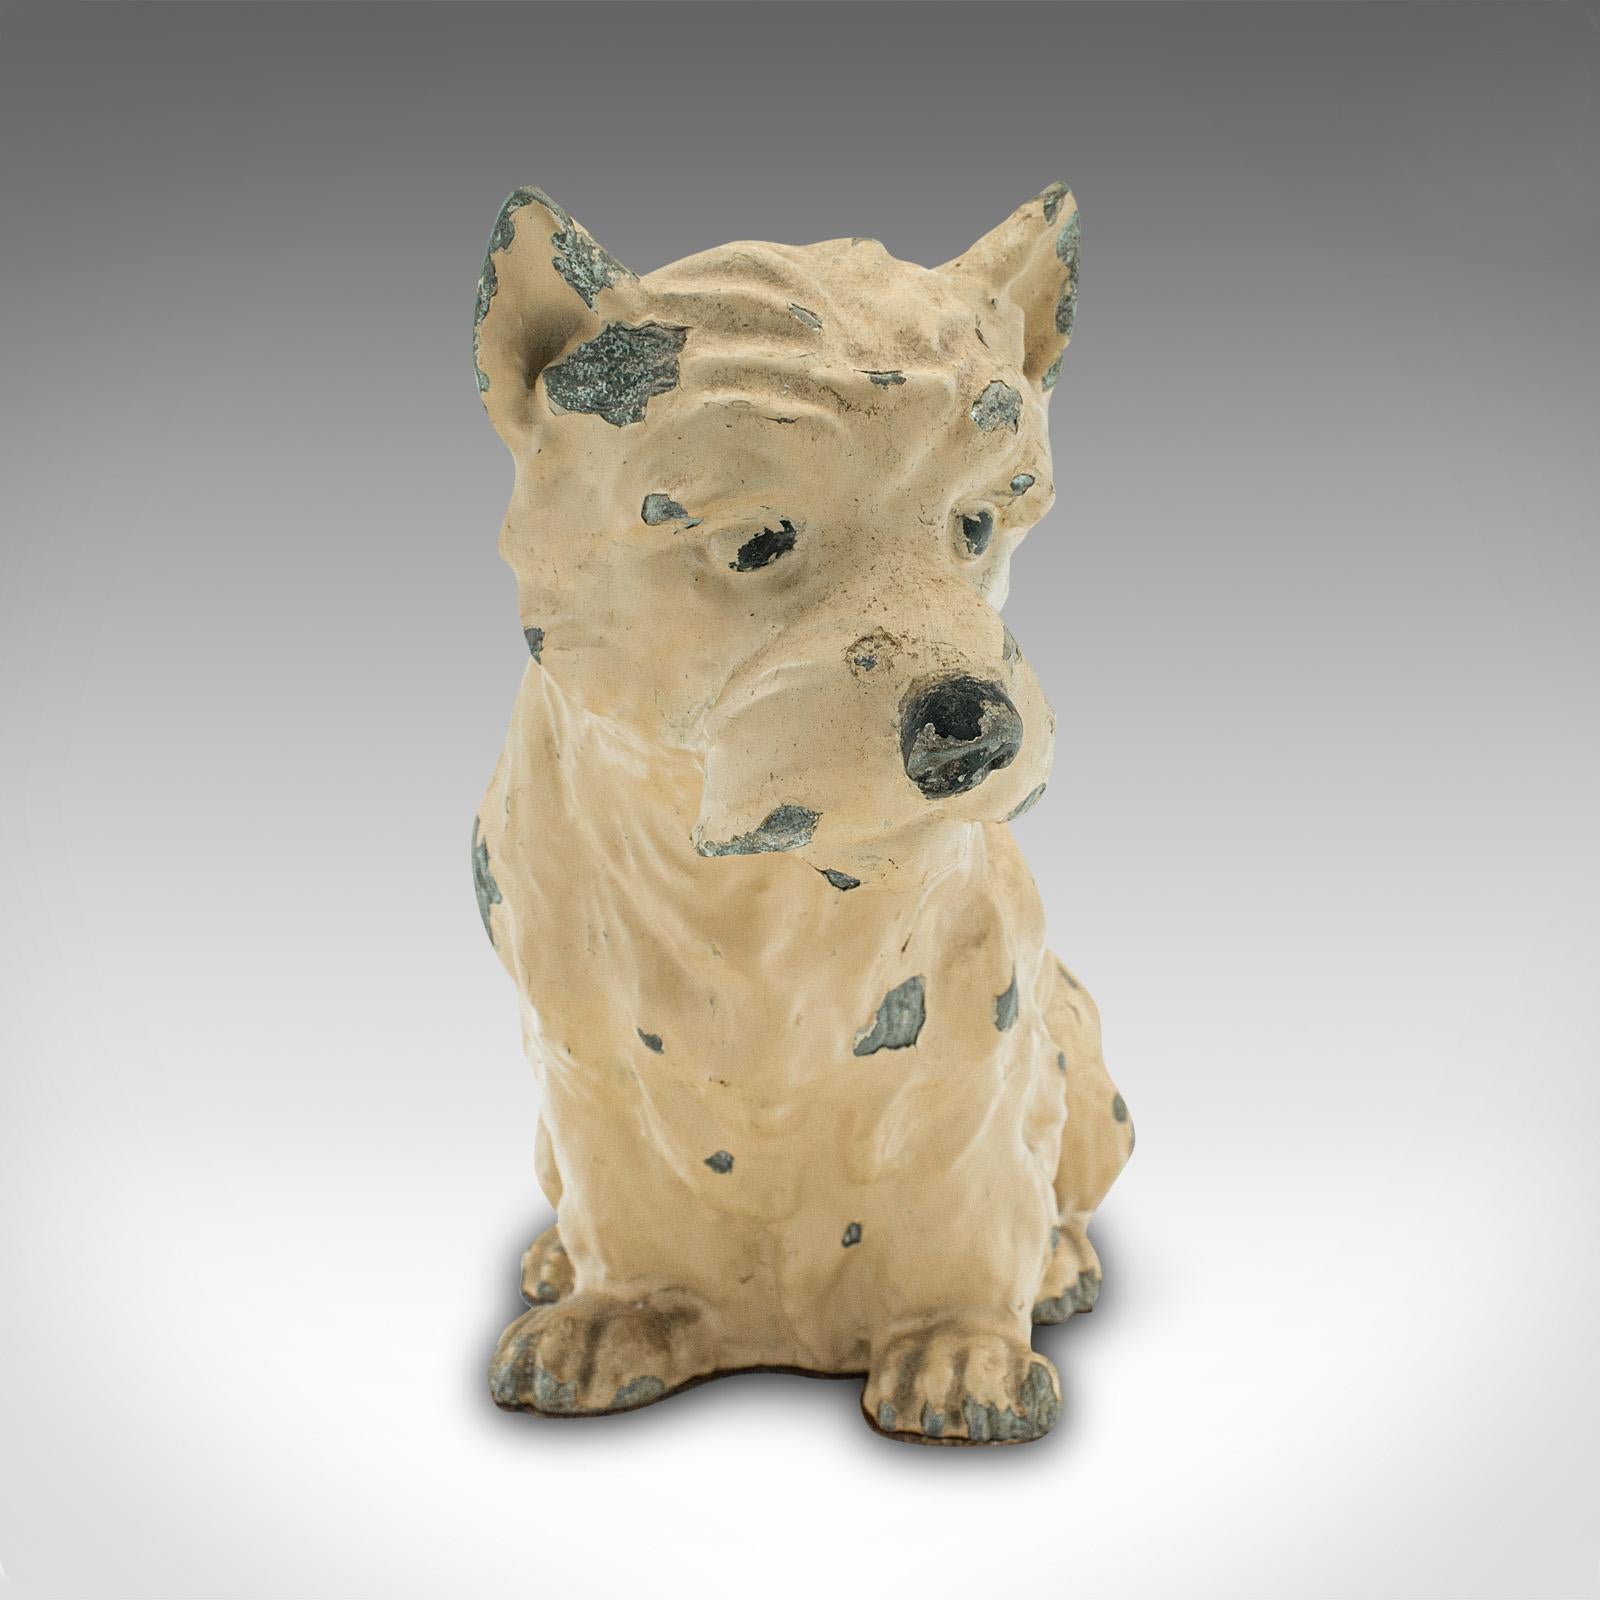 This is an antique decorative West Highland Terrier. A British, spelter ornamental Westie dog, dating to the Edwardian period, circa 1910.

Nicely detailed dog ornament with copious character and charm
Displays a desirable aged patina and in good